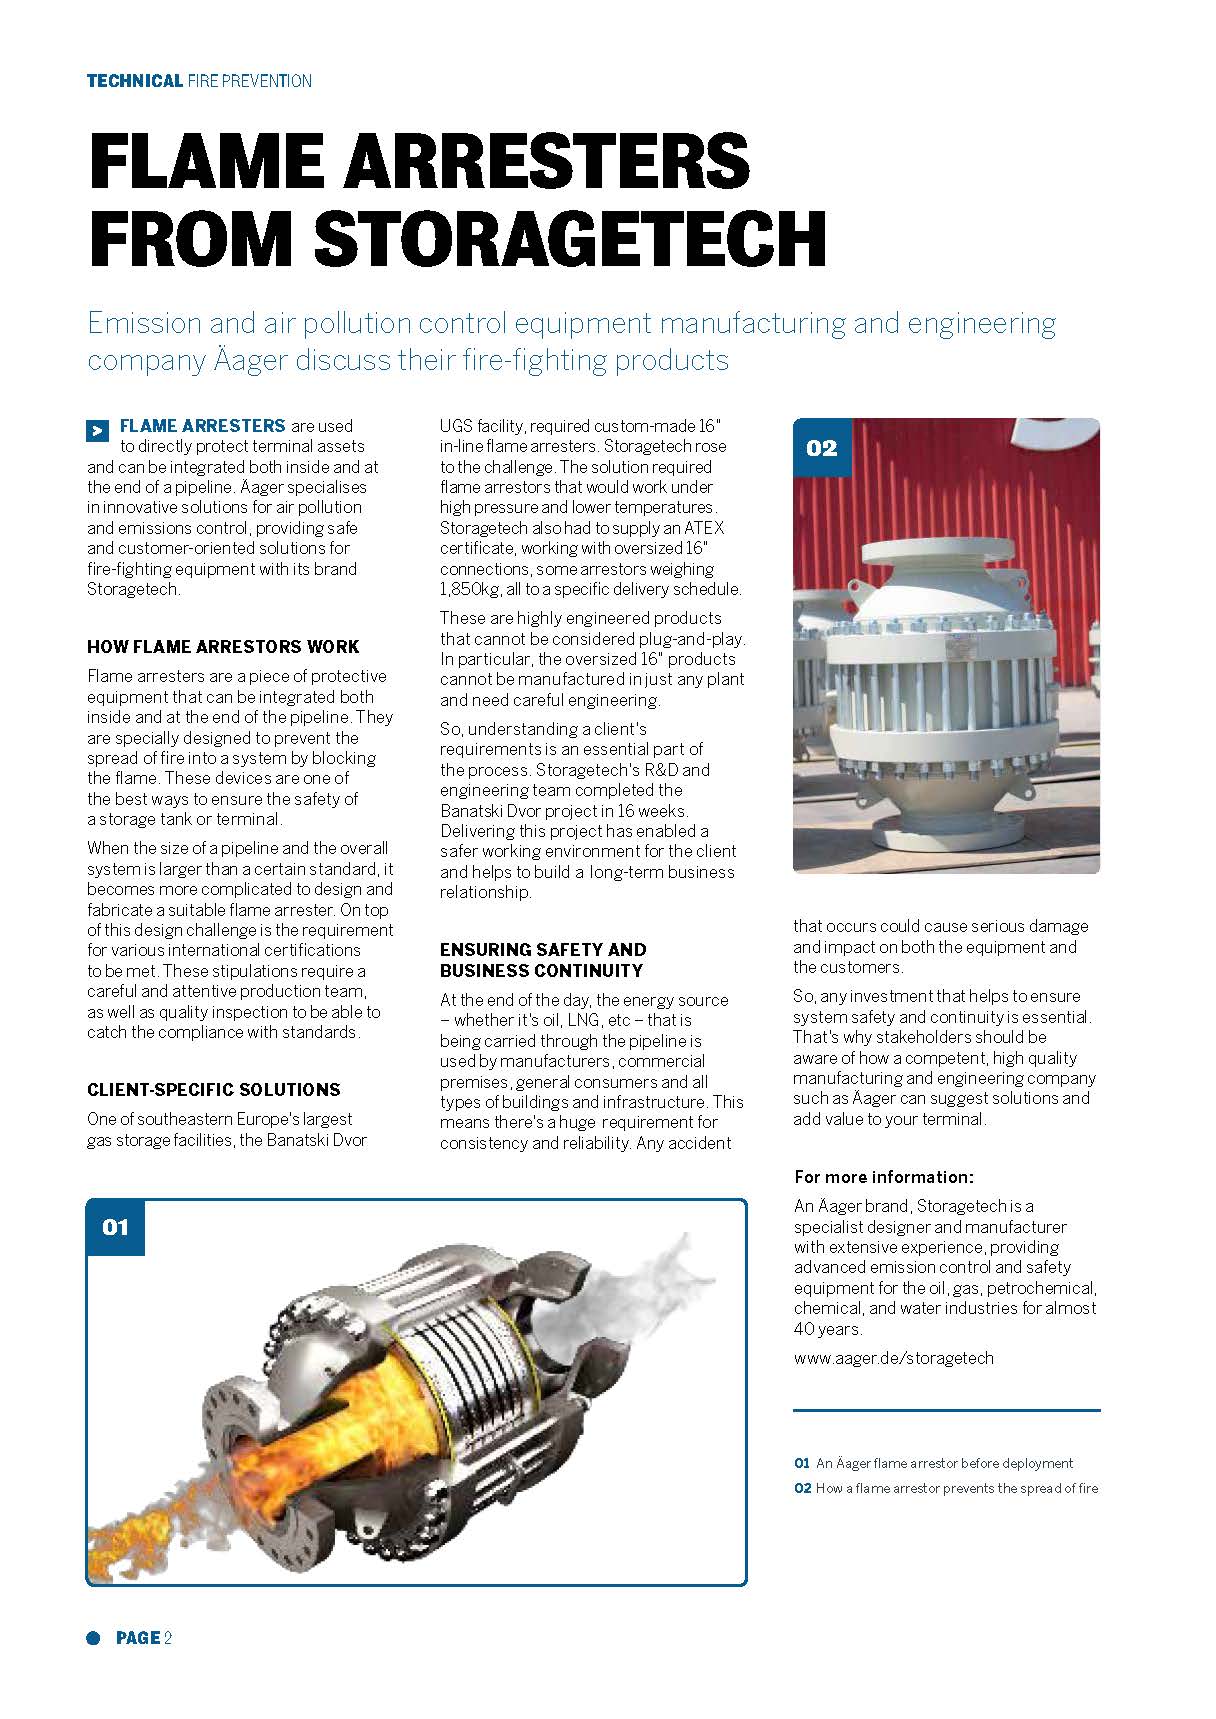 Customer-Oriented Flame Arresters from Storagetech – Tank Storage Magazine Article 69